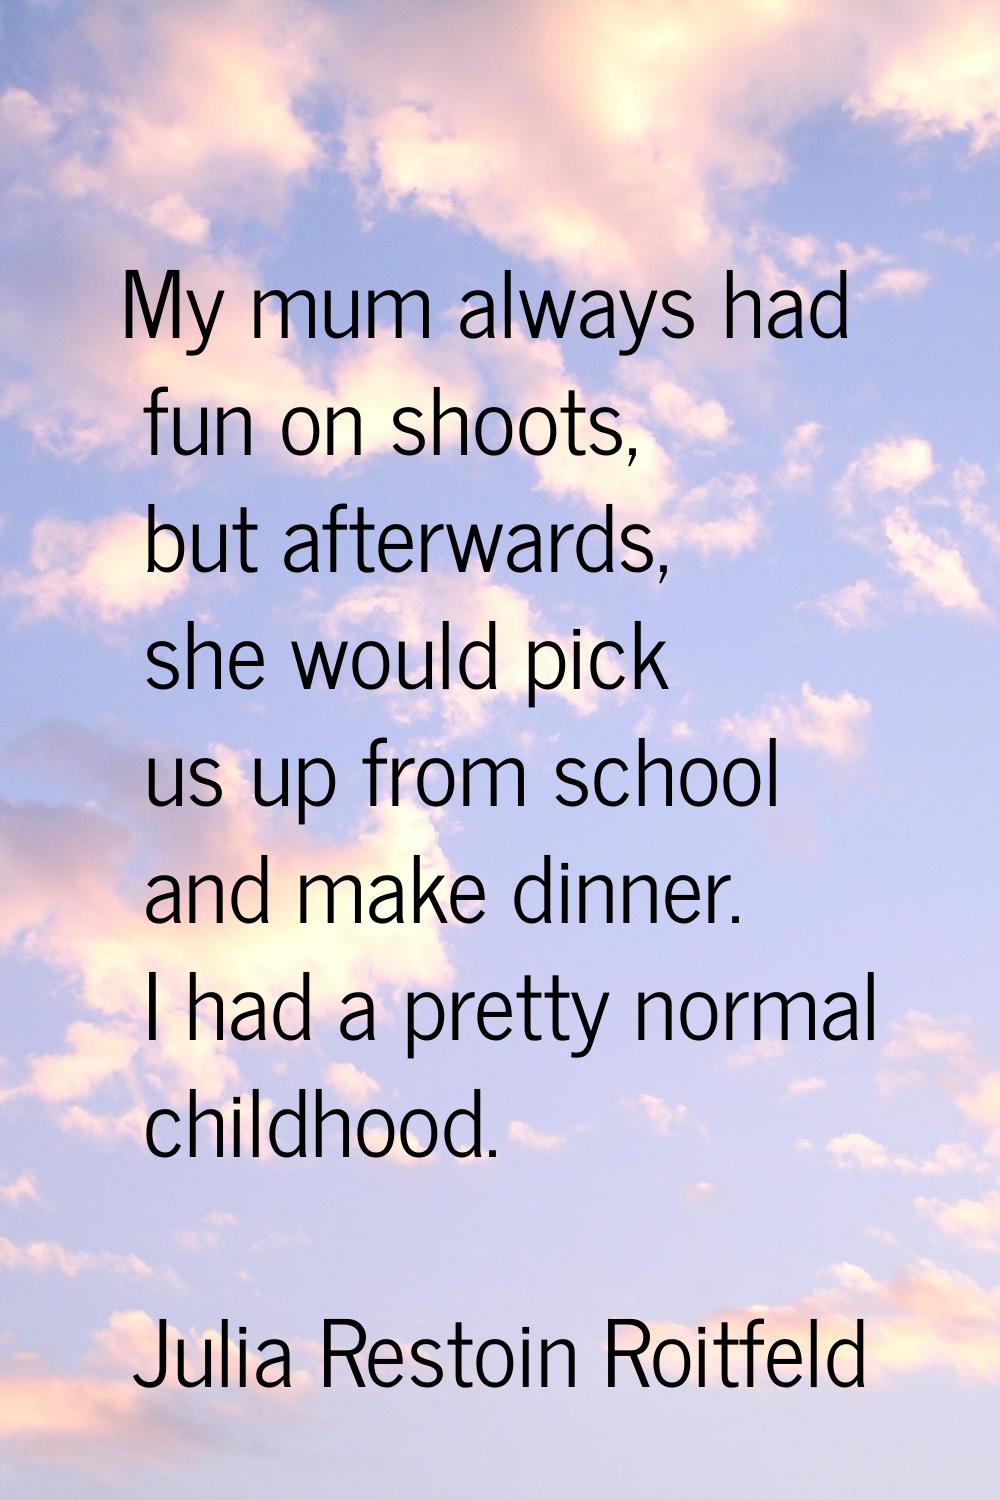 My mum always had fun on shoots, but afterwards, she would pick us up from school and make dinner. 